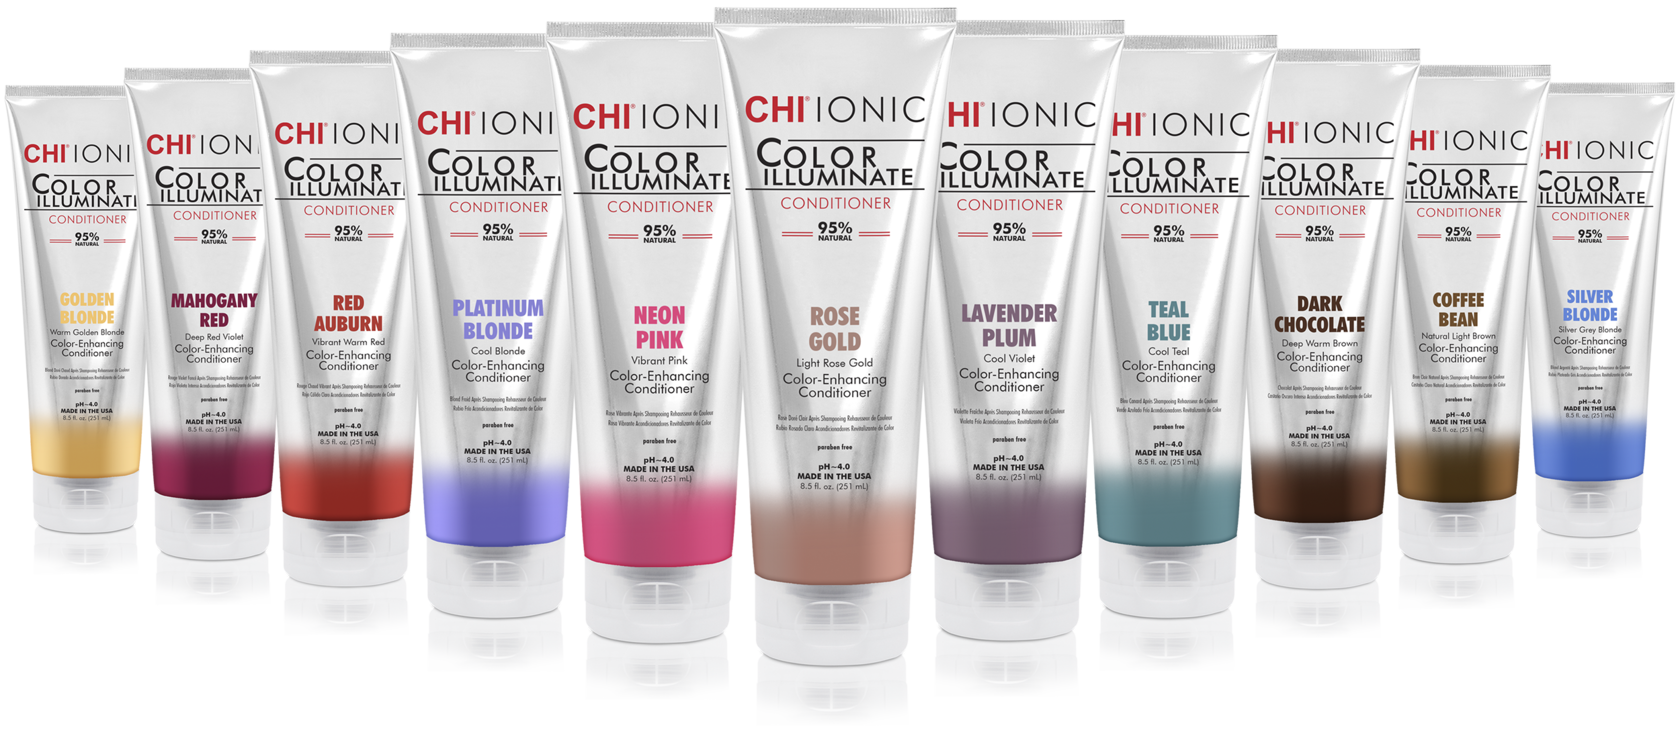 CHI Ionic Color Illuminate Color Enhancing Conditioner - wide 2